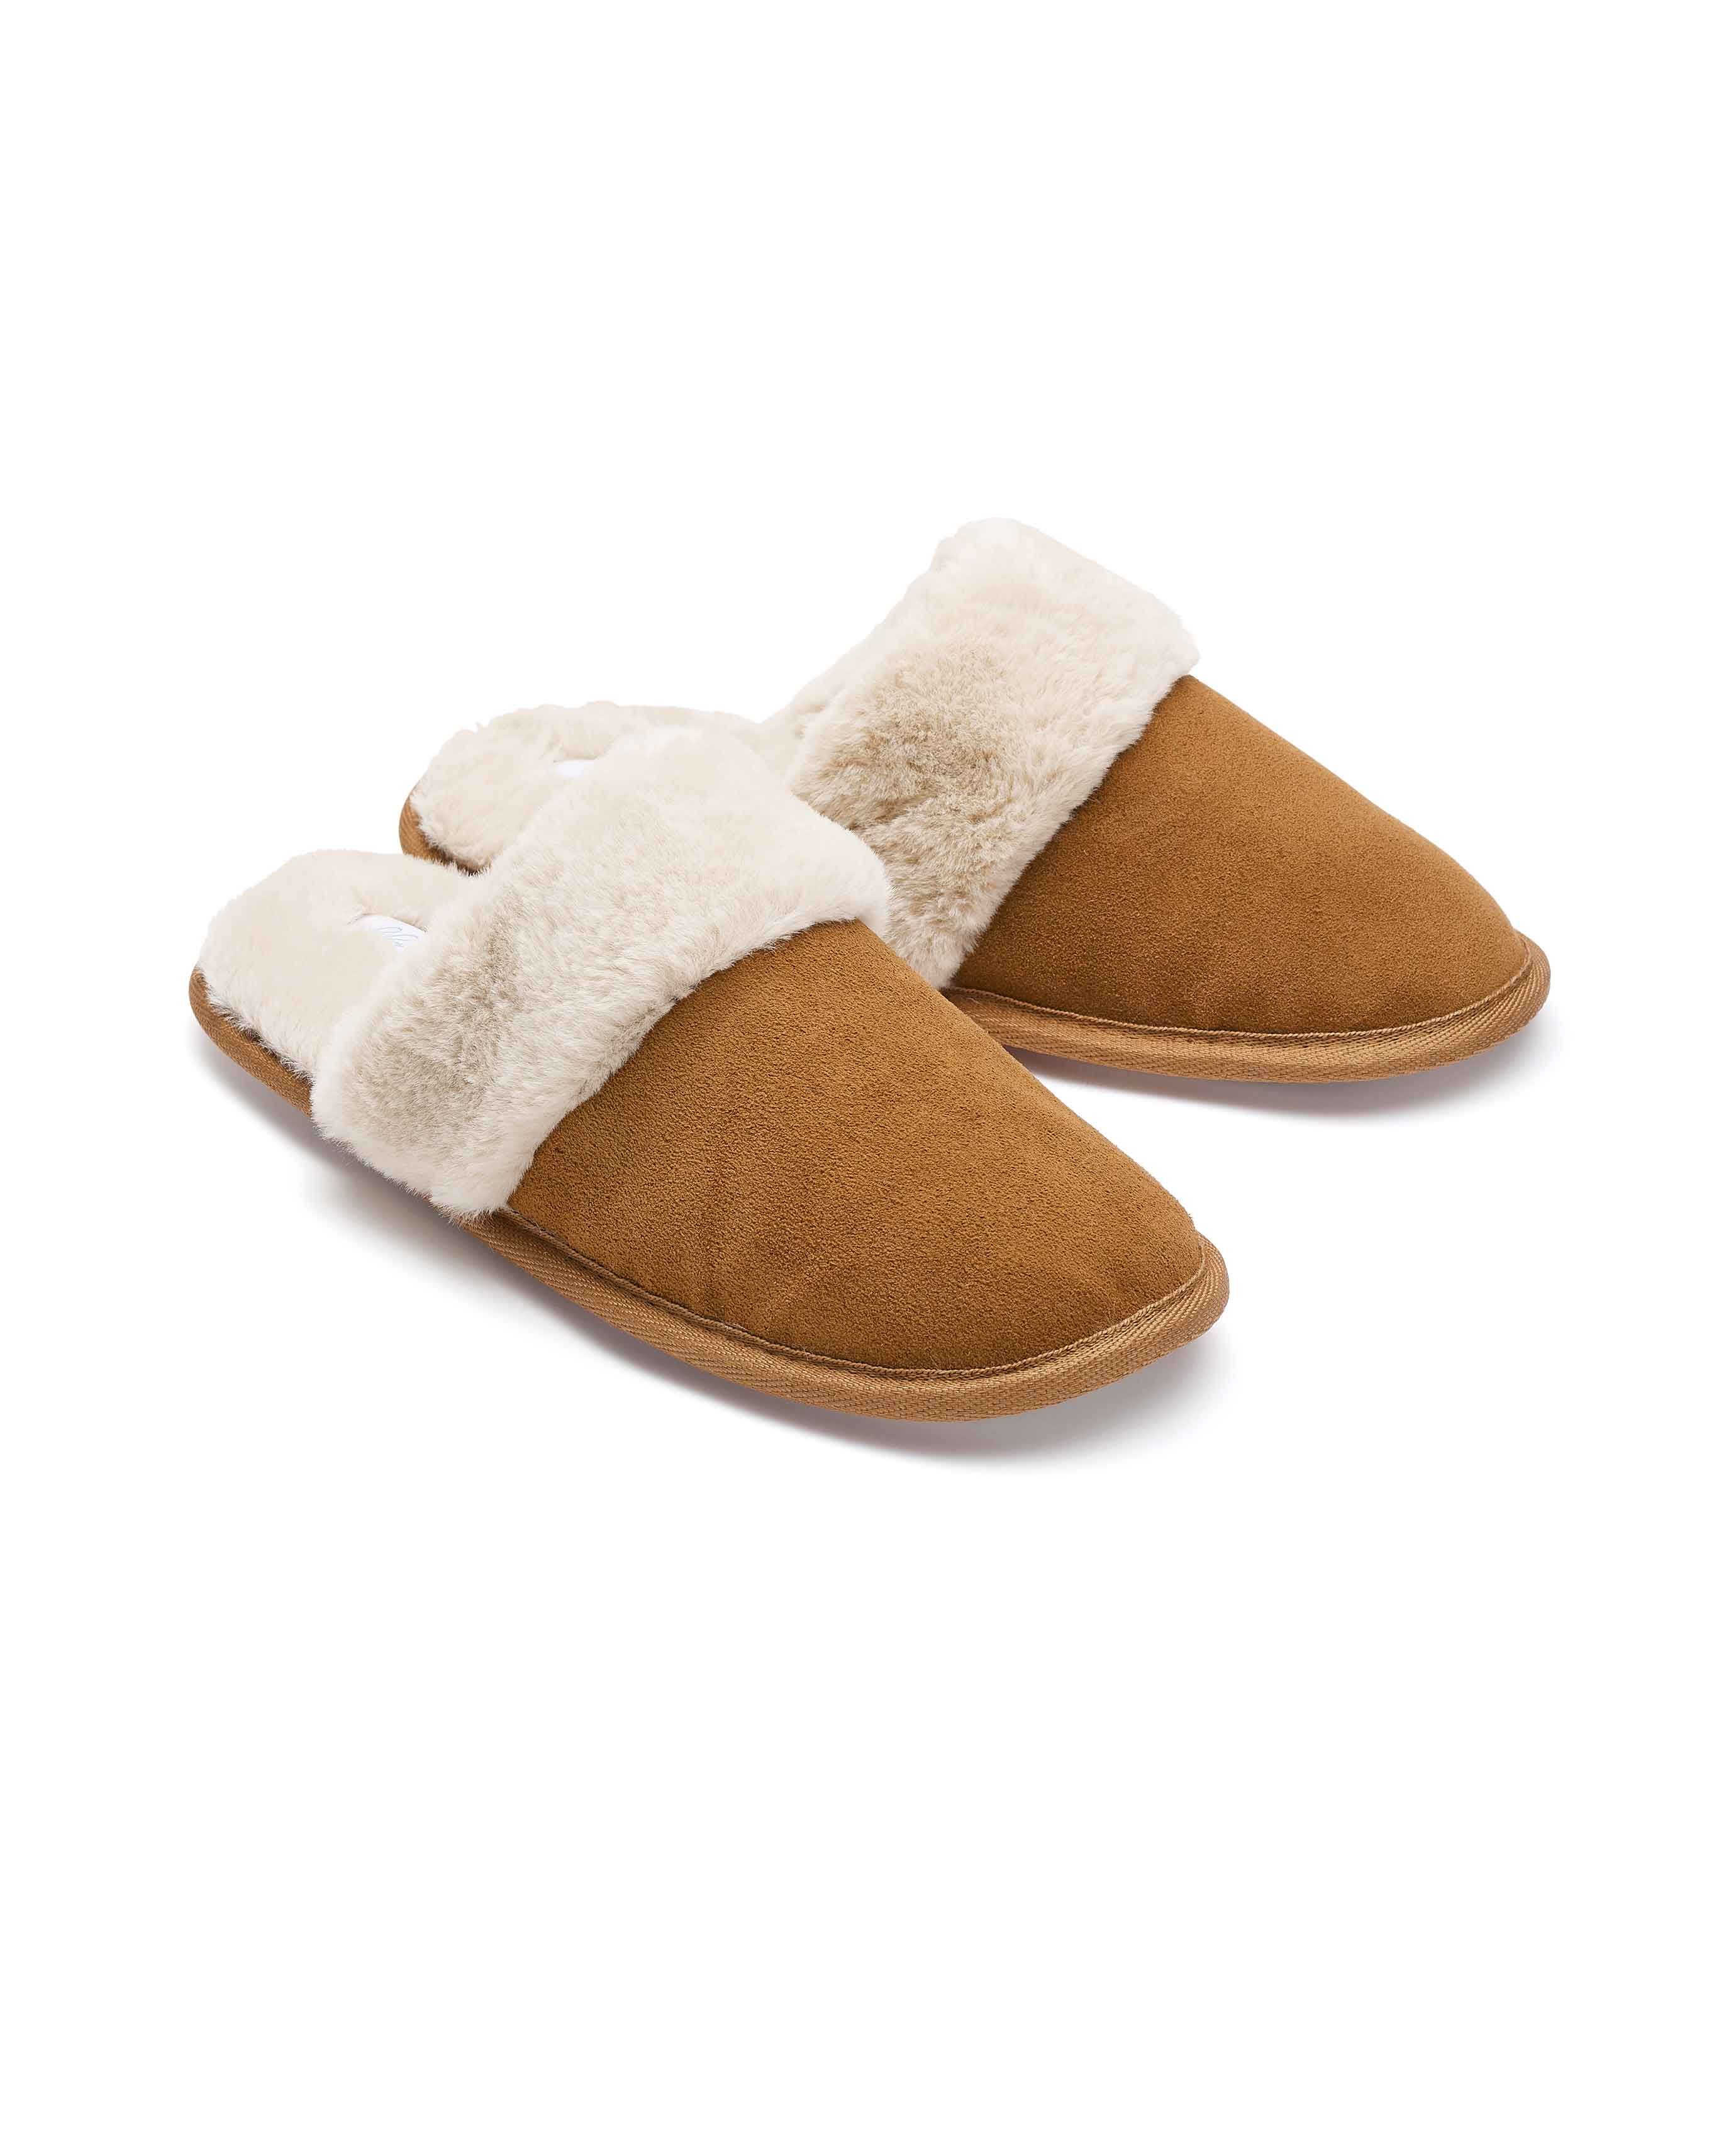 Buy Cream Teddy Borg Buckle Mule Slippers from the Next UK online shop